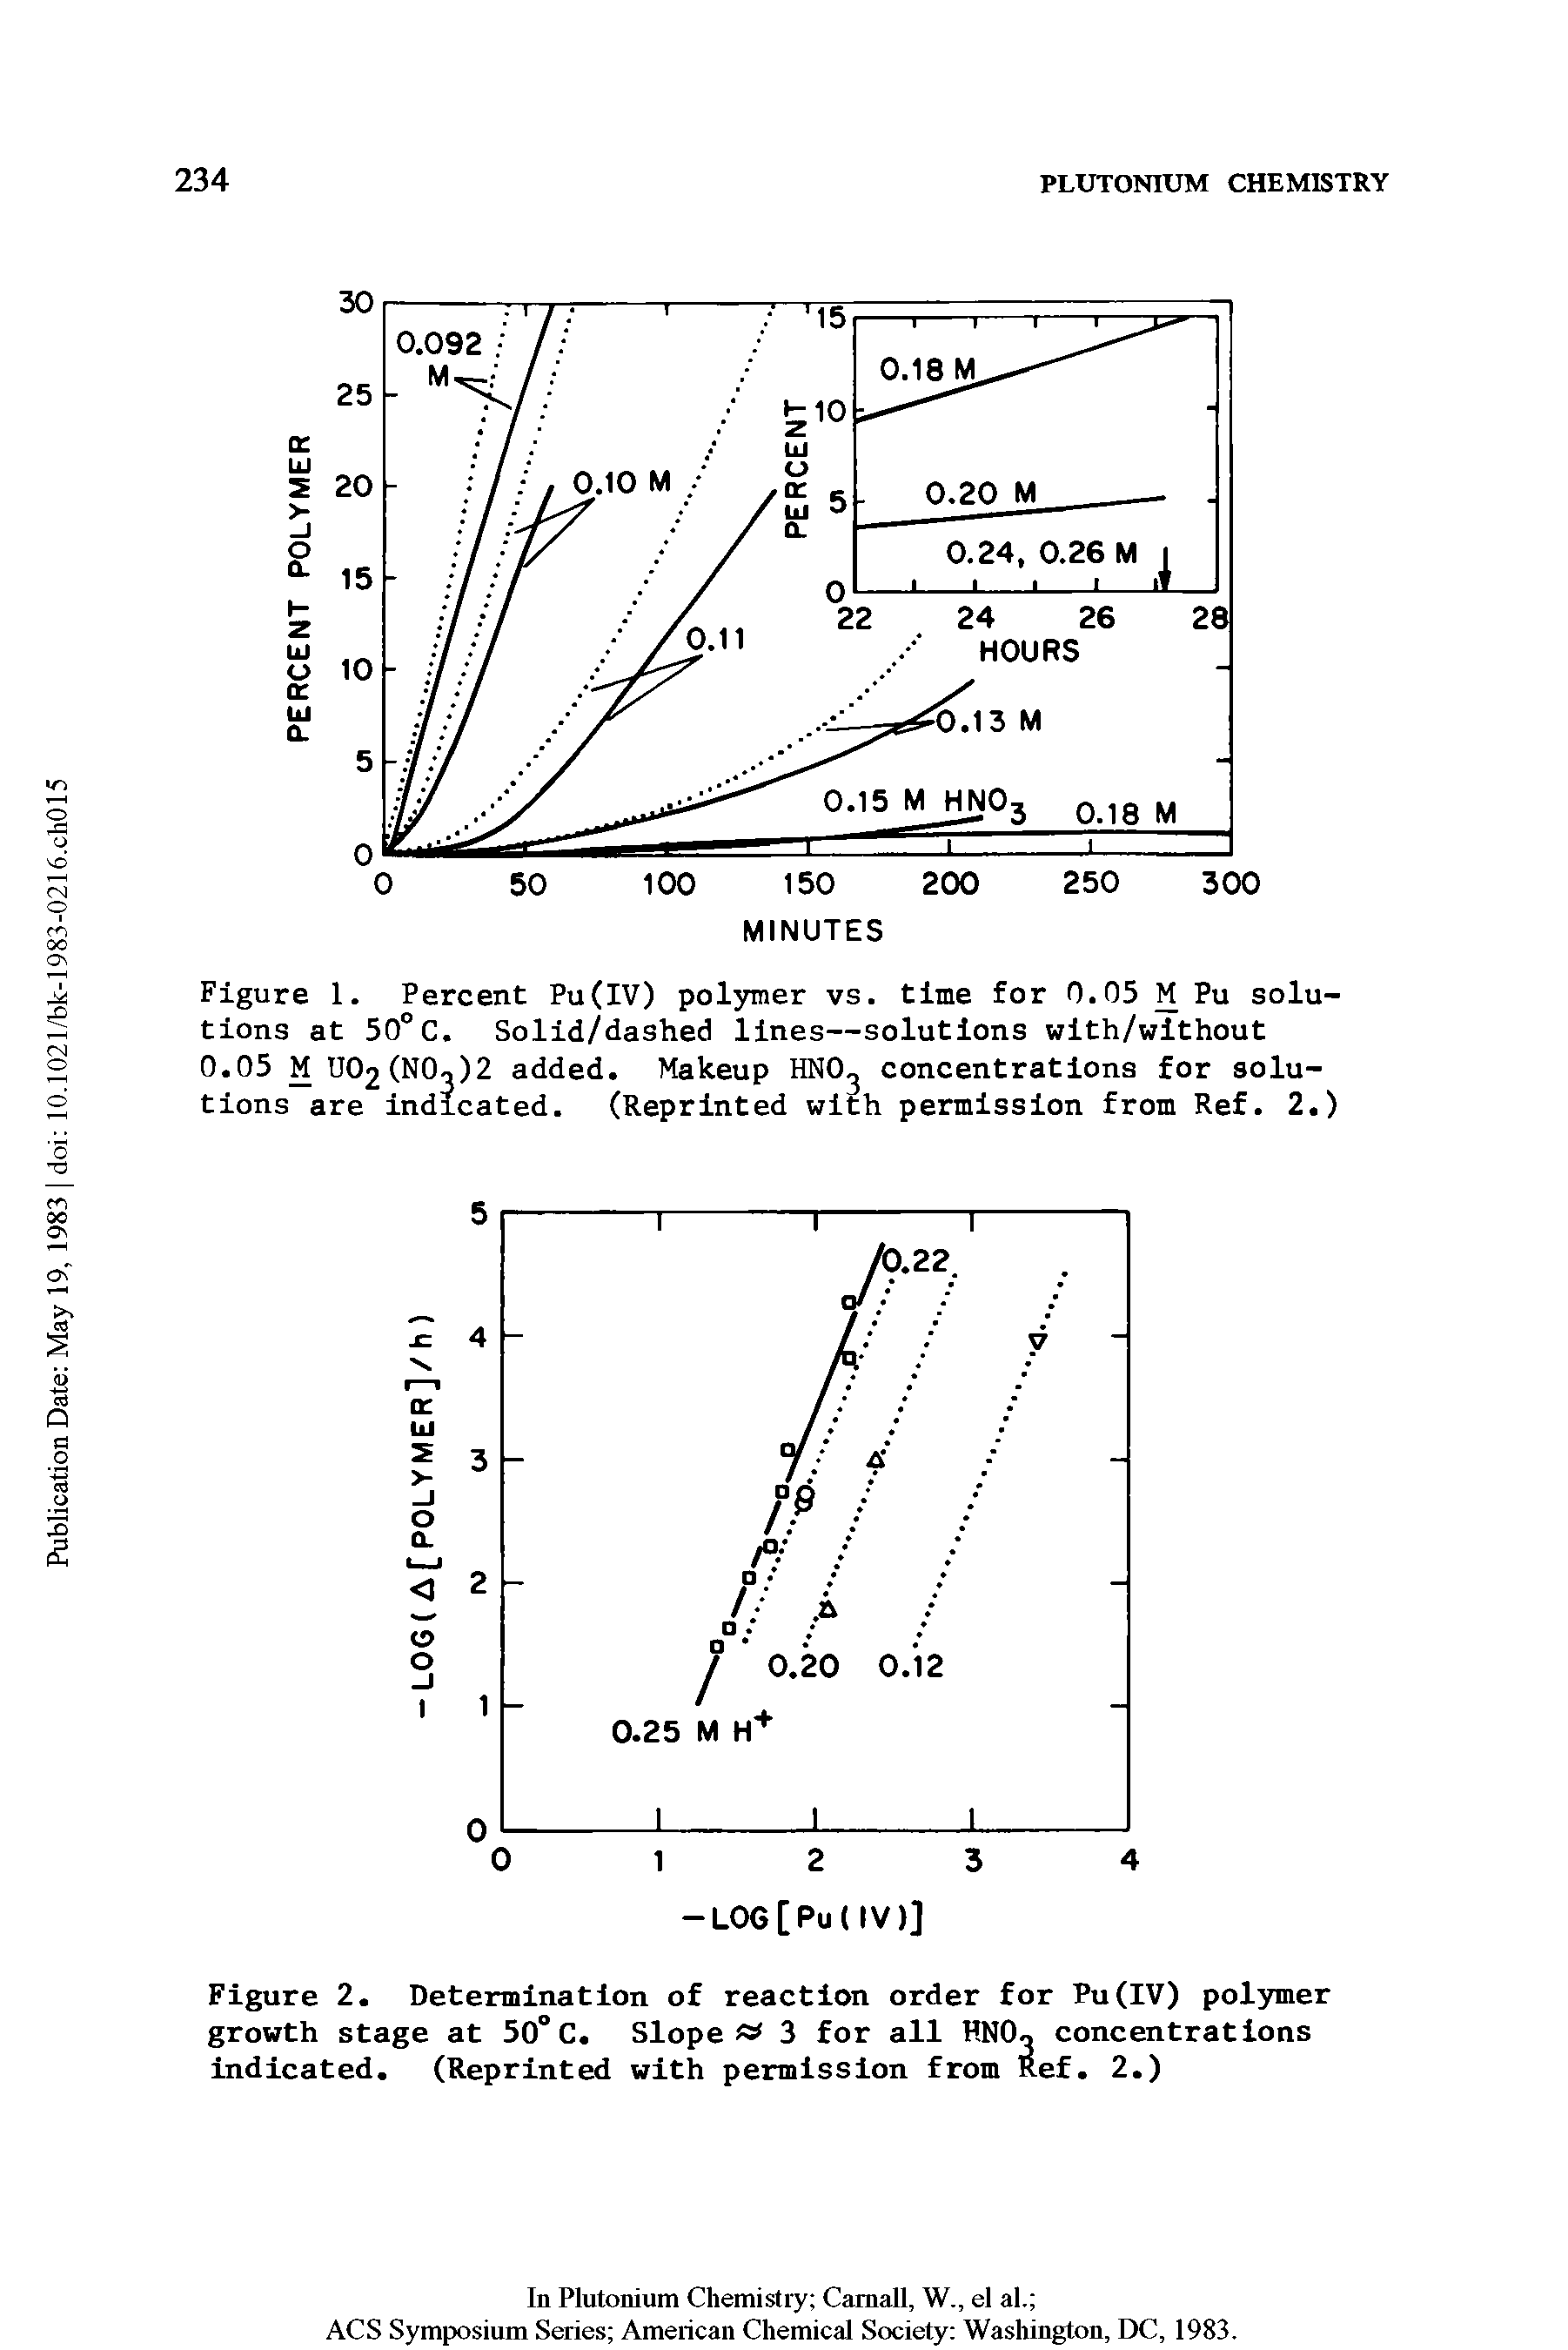 Figure 2. Determination of reaction order for Pu(IV) polymer growth stage at 50° C. Sloped 3 for all HNO, concentrations indicated. (Reprinted with permission from Ref. 2.)...